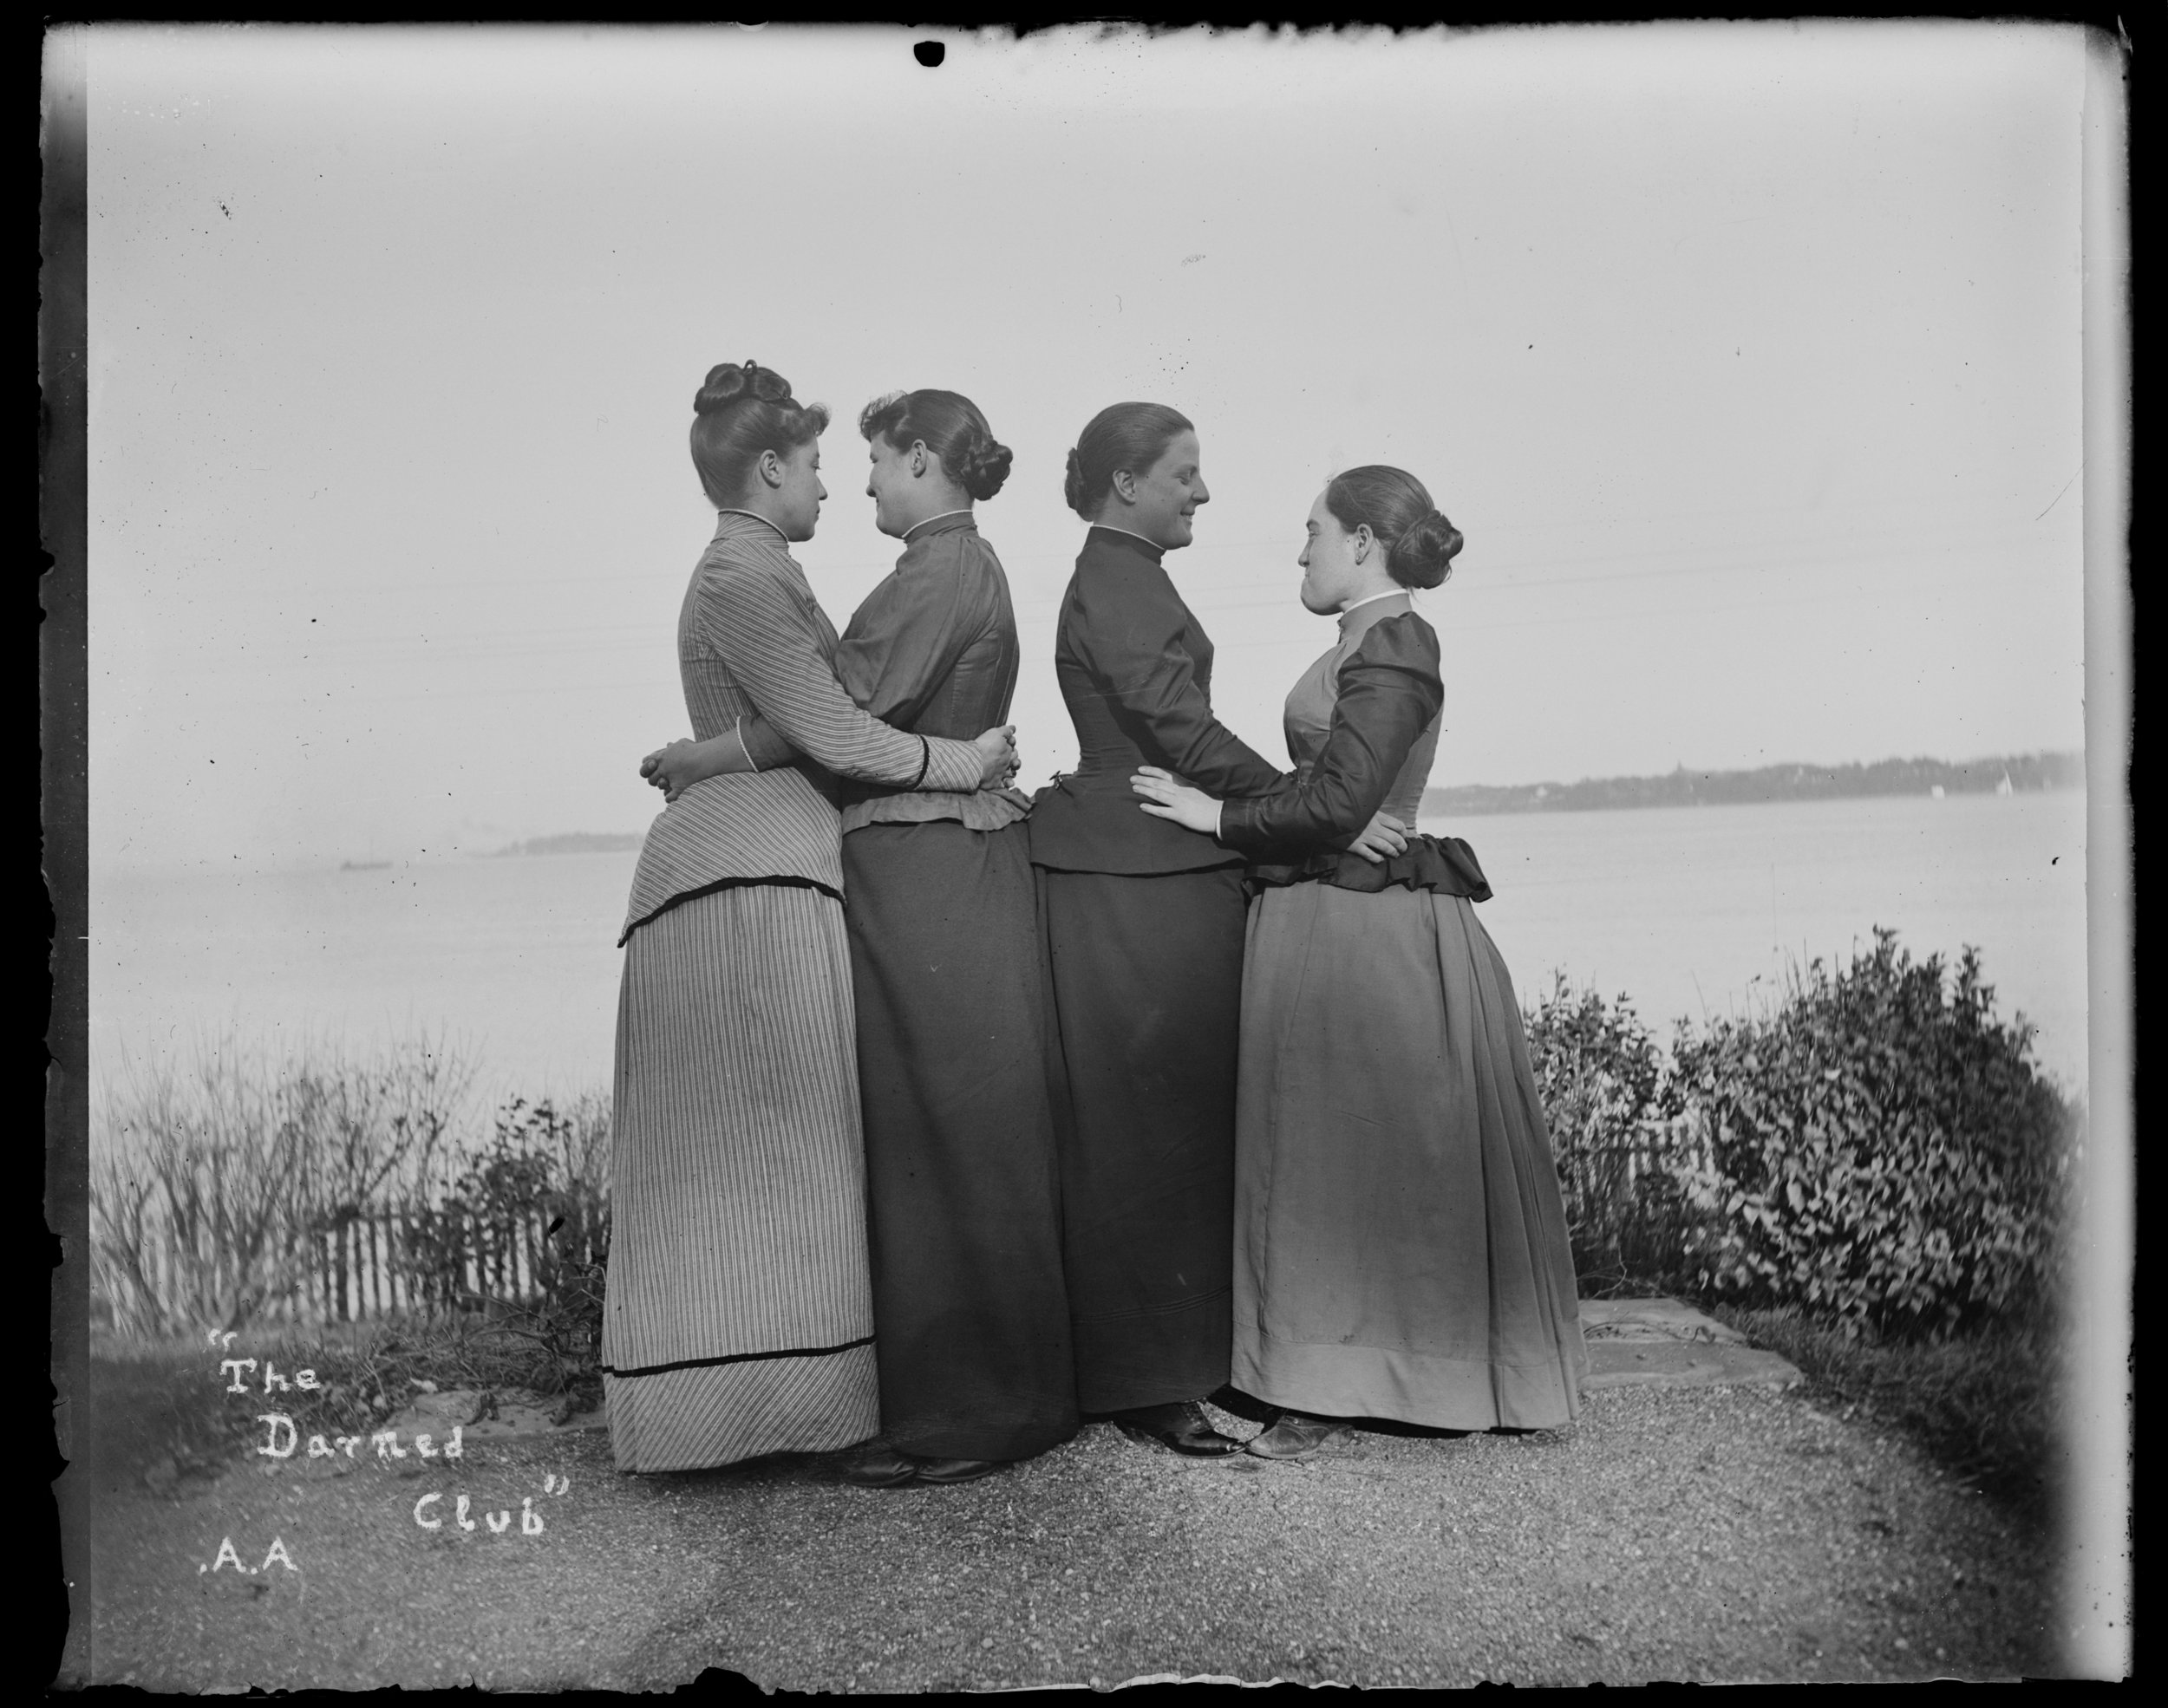 “The Darned Club,” Staten Island, October 29, 1891. From left to right: Alice Austen, Trude Eccleston, Julia (Marsh) Lord, and Sue Ripley